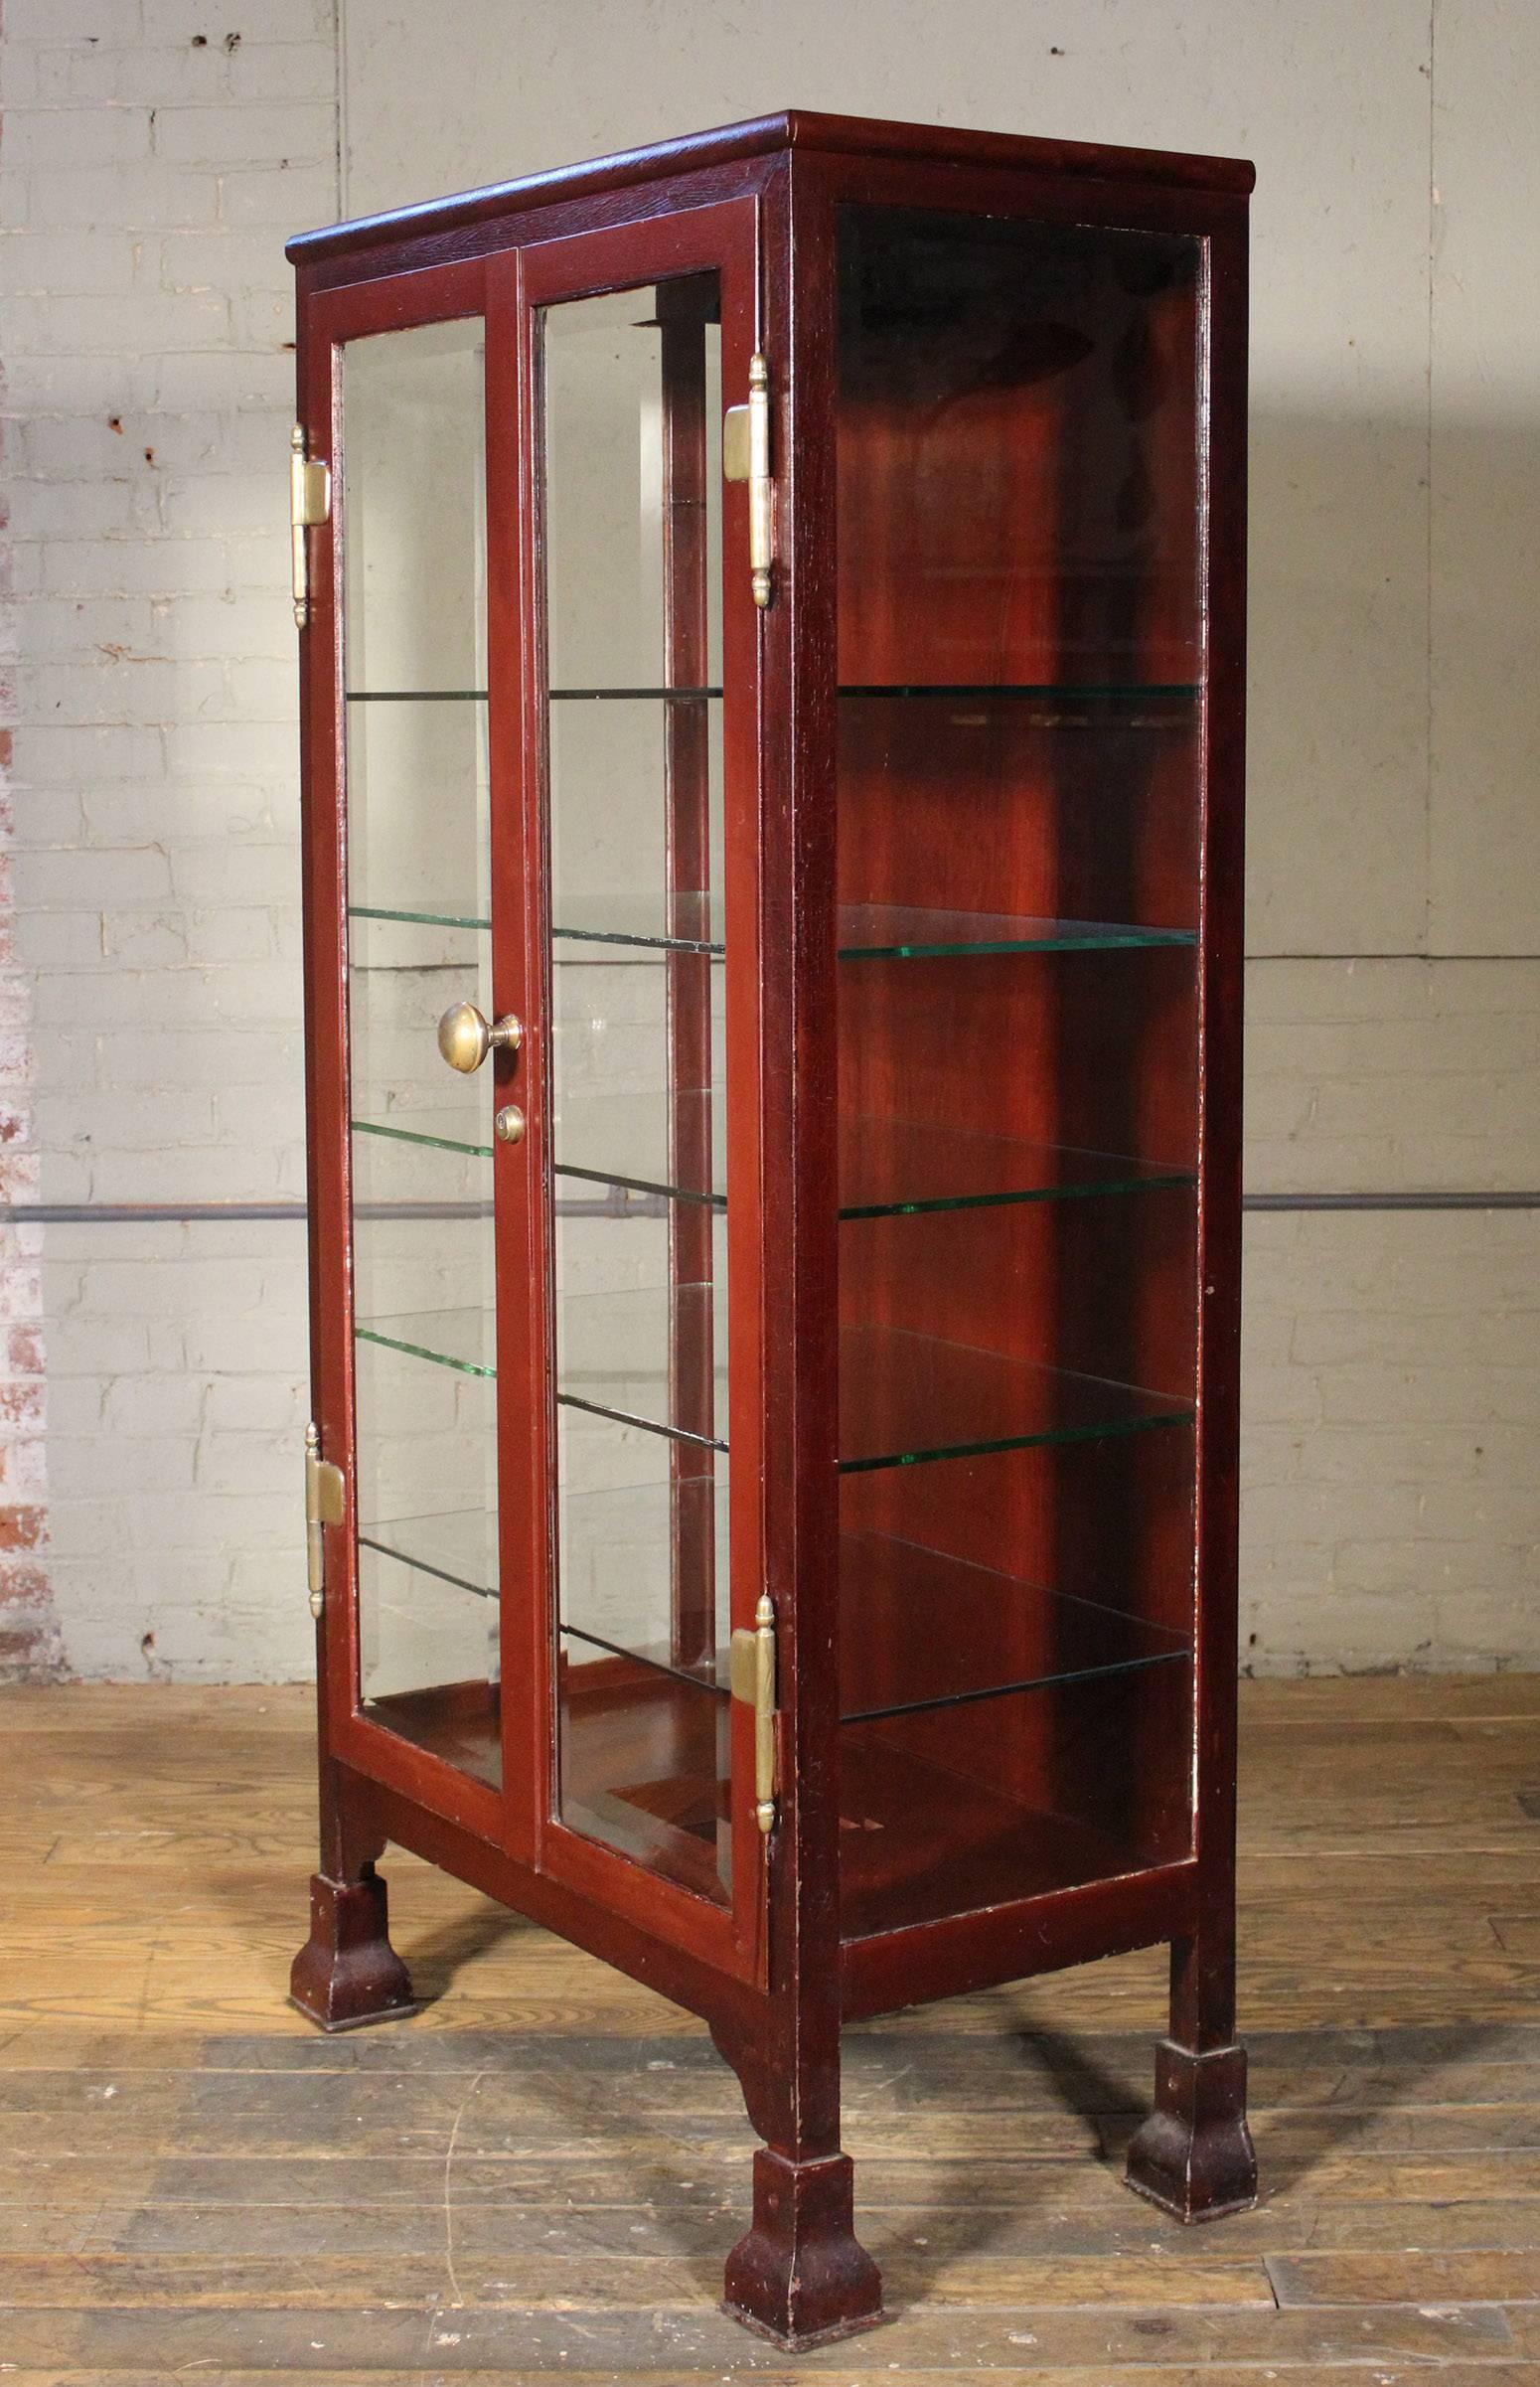 Vintage Industrial glass and metal curio/medical storage cabinet/cupboard with five glass shelves. Distressed crackled paint over metal.